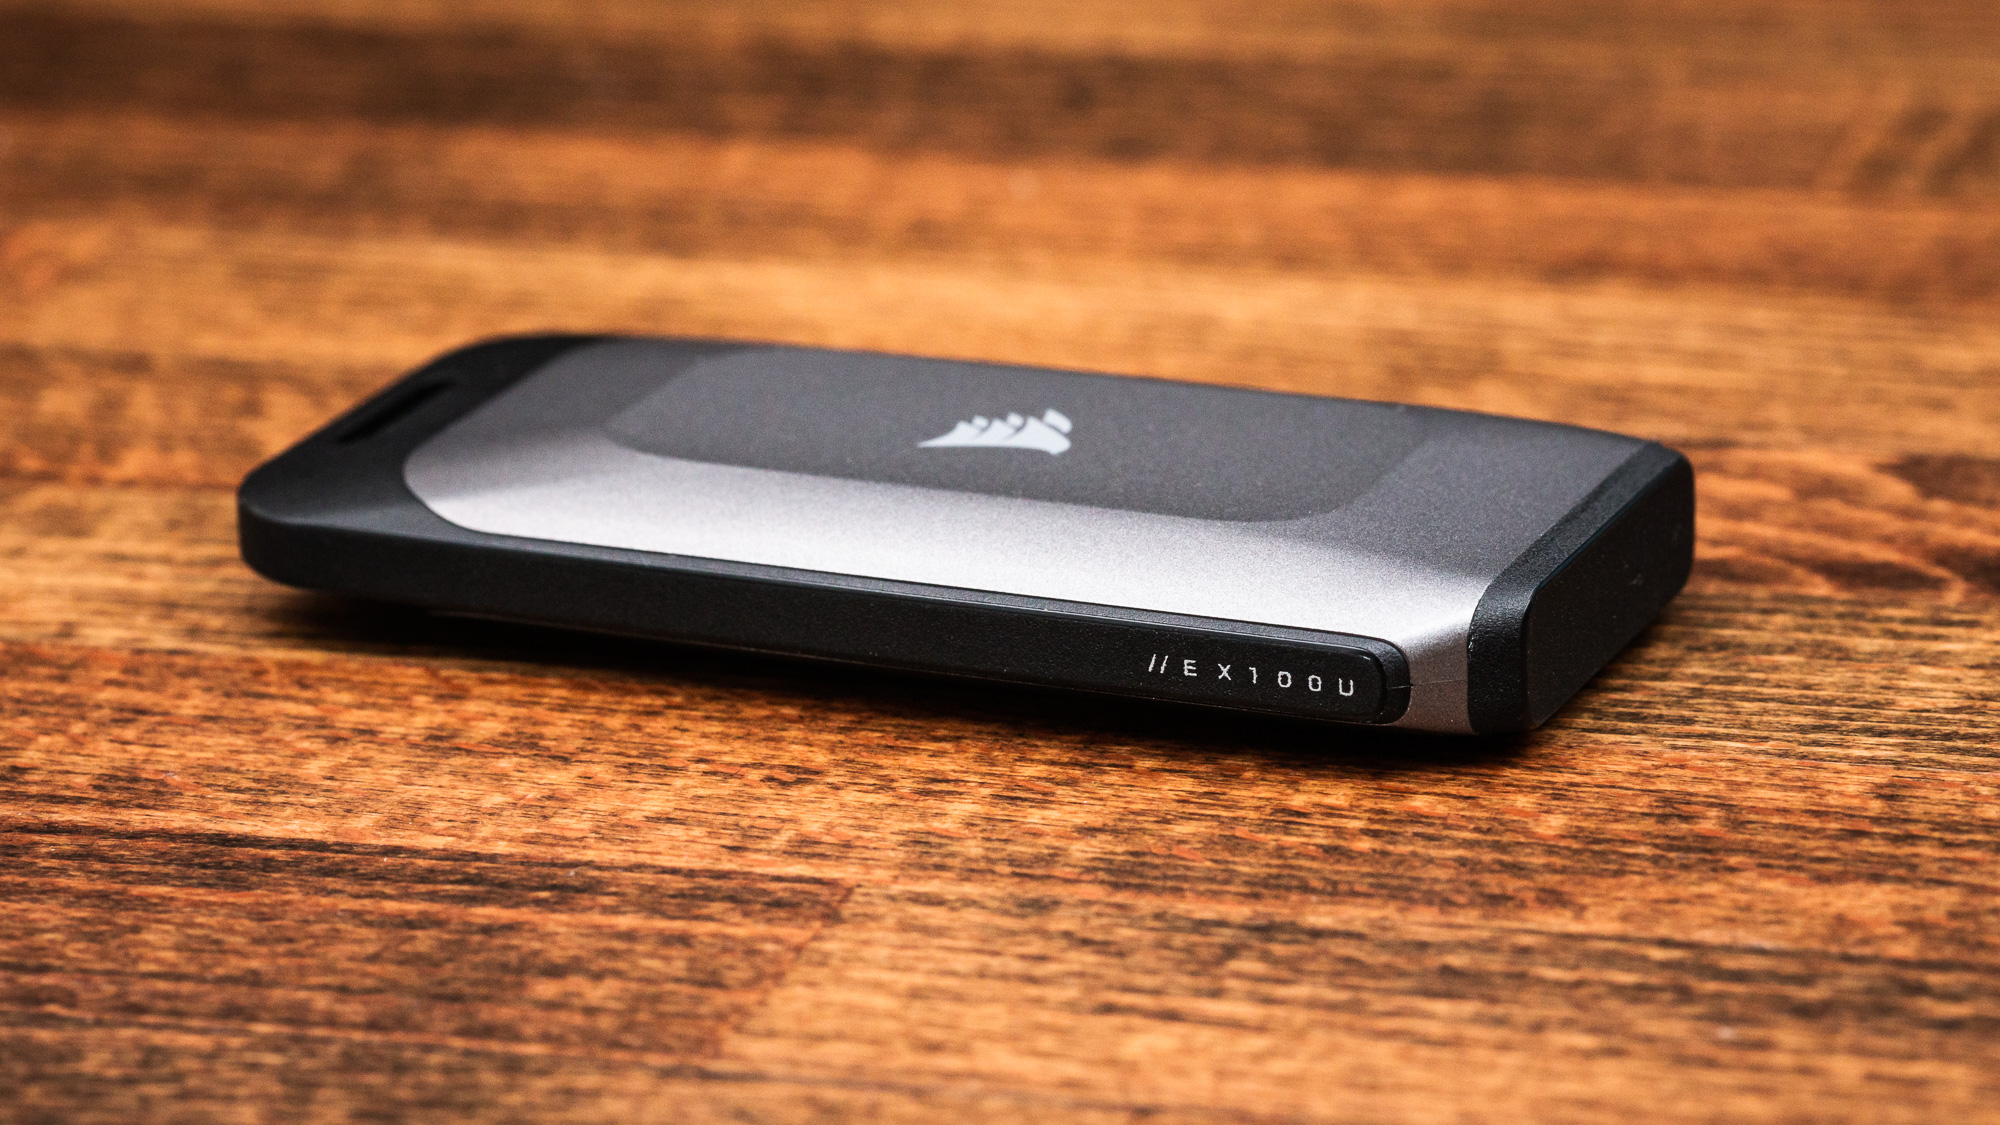 Crucial X6 Portable 1TB USB SSD review